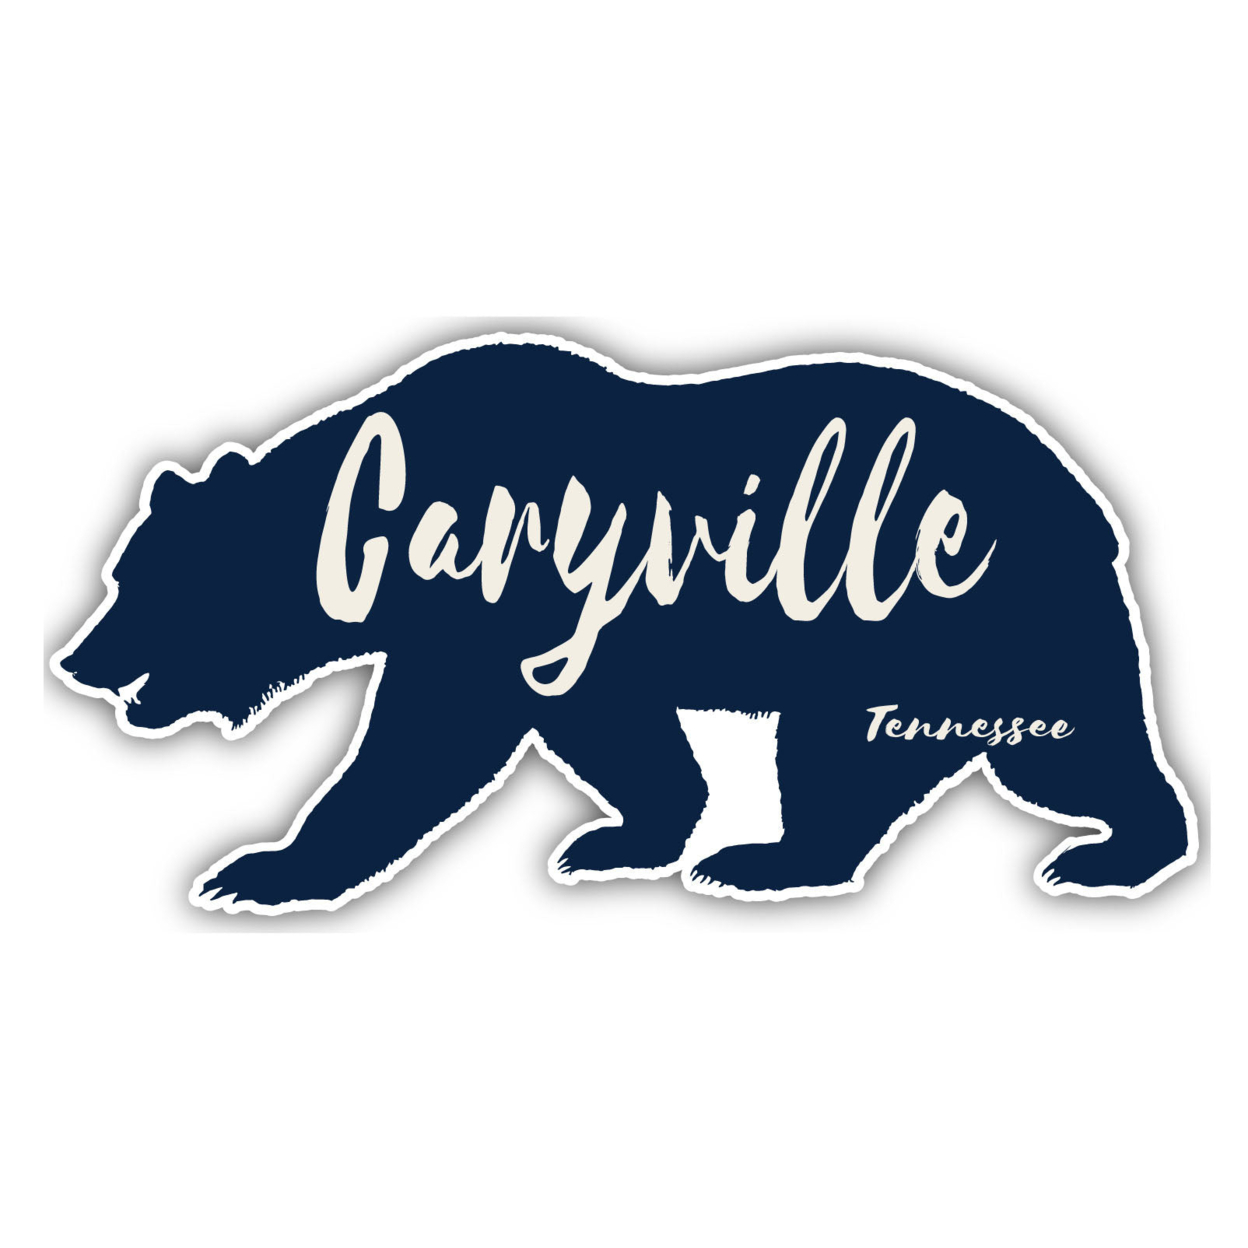 Caryville Tennessee Souvenir Decorative Stickers (Choose Theme And Size) - Single Unit, 10-Inch, Bear